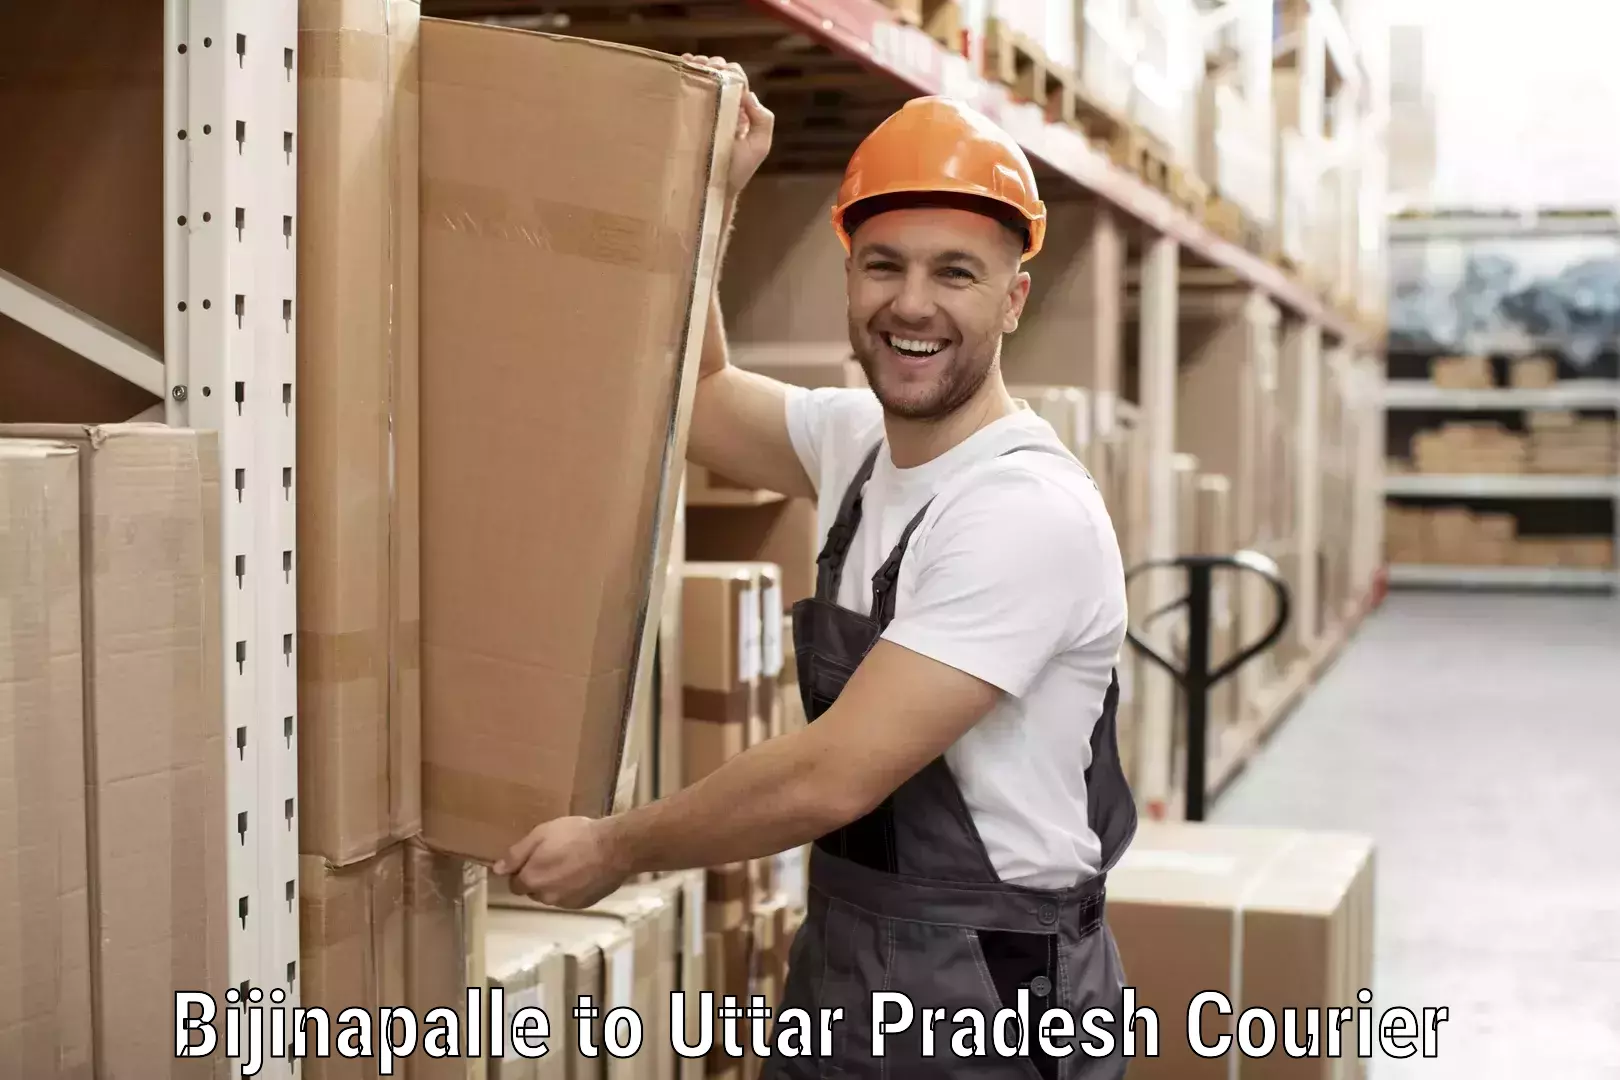 Tailored shipping plans Bijinapalle to Khalilabad